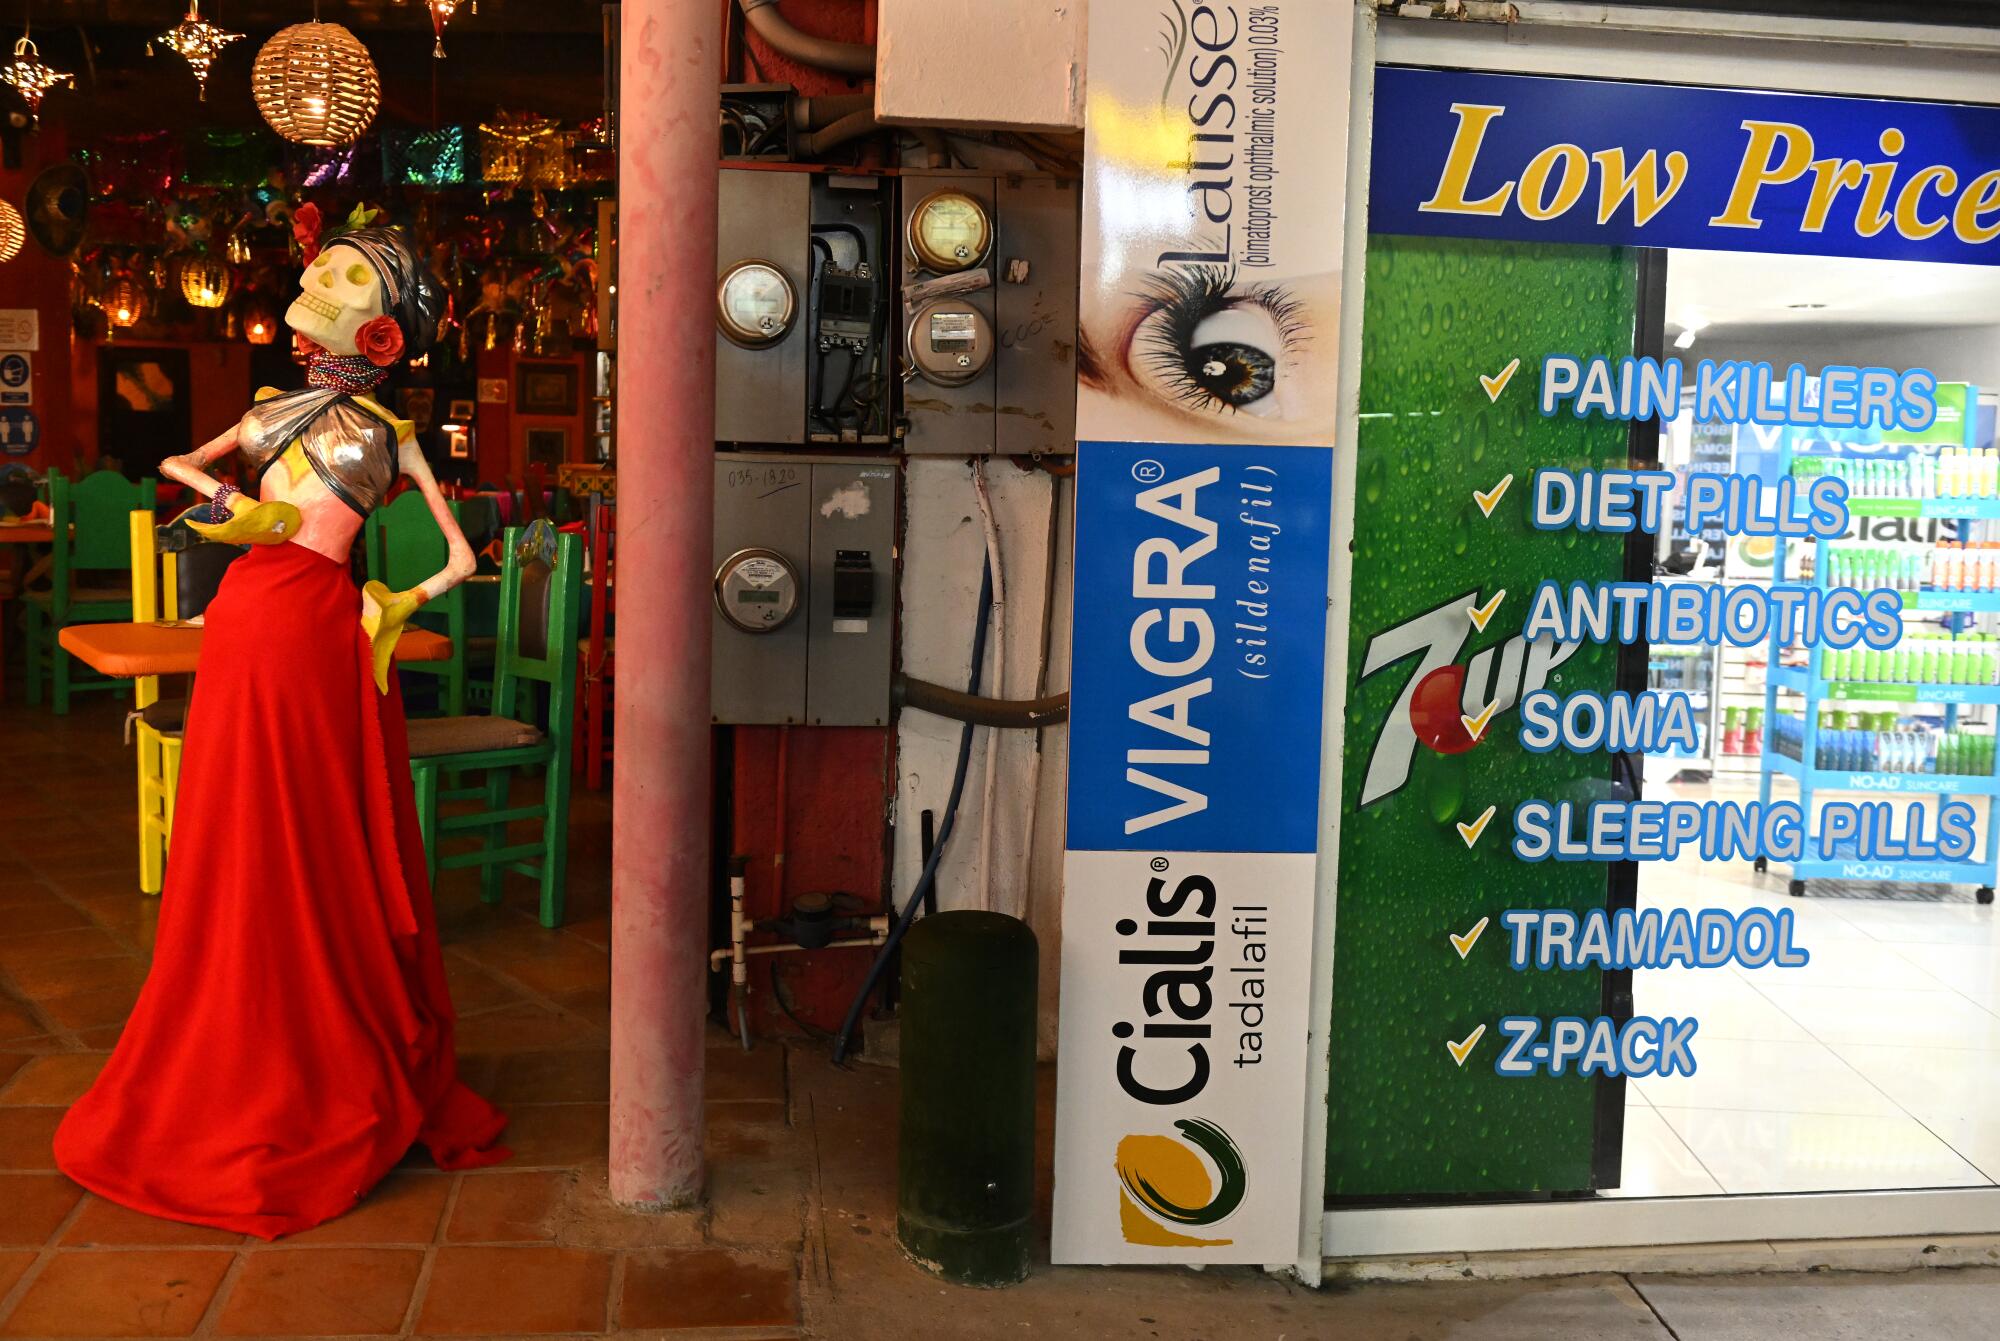 Colorful decor including a skeleton in a red skirt next to a store advertising medications including painkillers in English